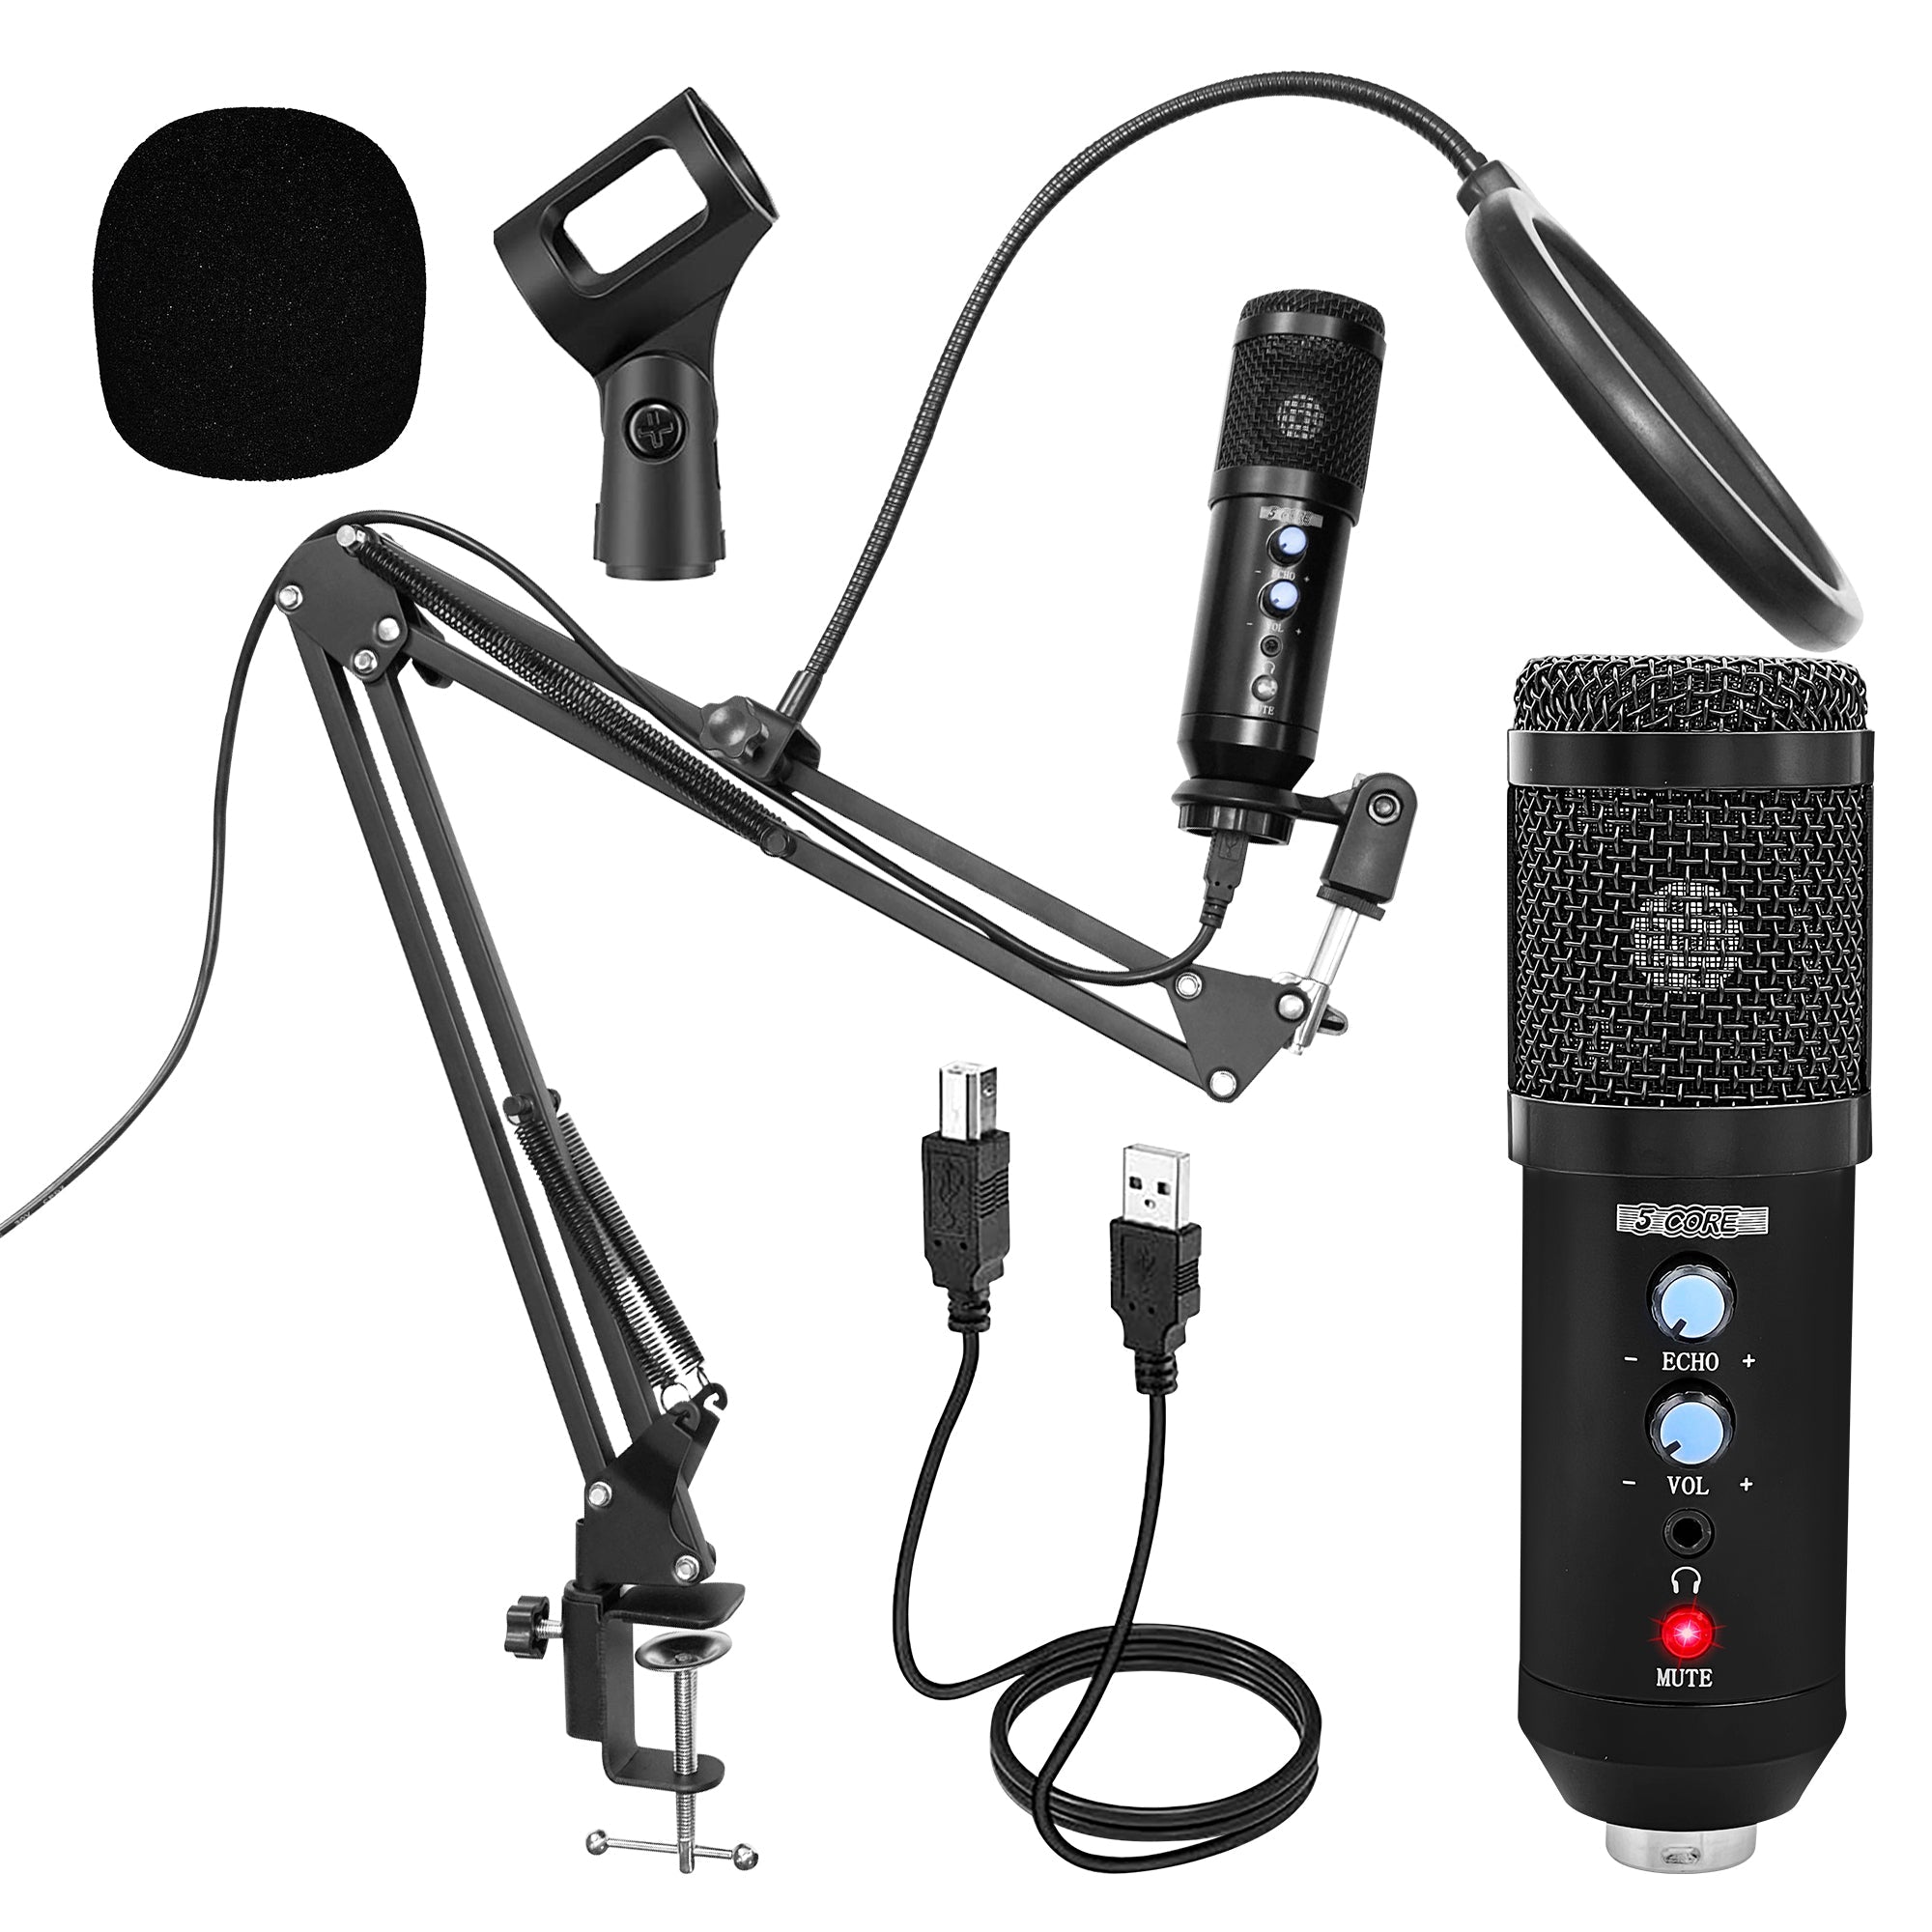 5 Core Podcast Microphone Bundle USB Condenser PC Mic Recording Studio Equipment Gaming Streaming